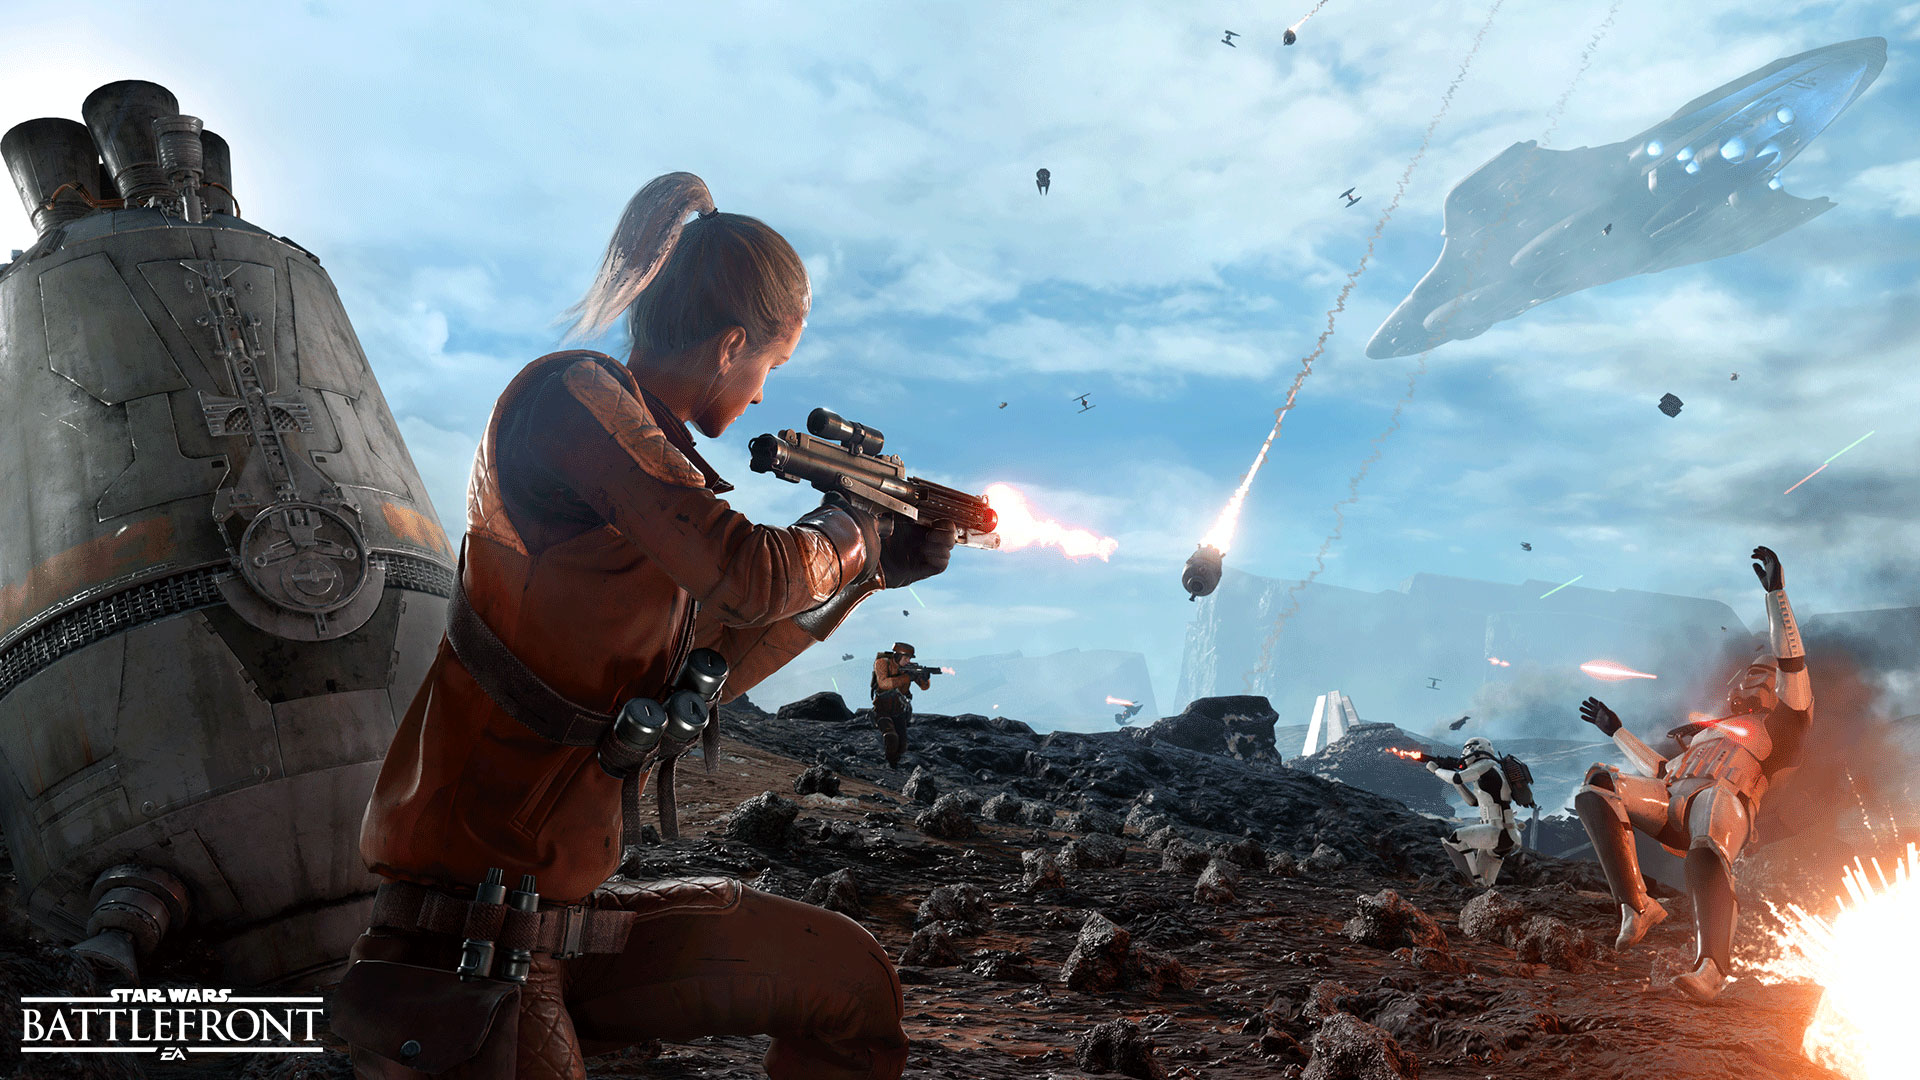 Media asset in full size related to 3dfxzone.it news item entitled as follows: Electronic Arts estende il periodo di beta testing di Star Wars Battlefront | Image Name: news23196_Star-Wars-Battlefront_3.jpg